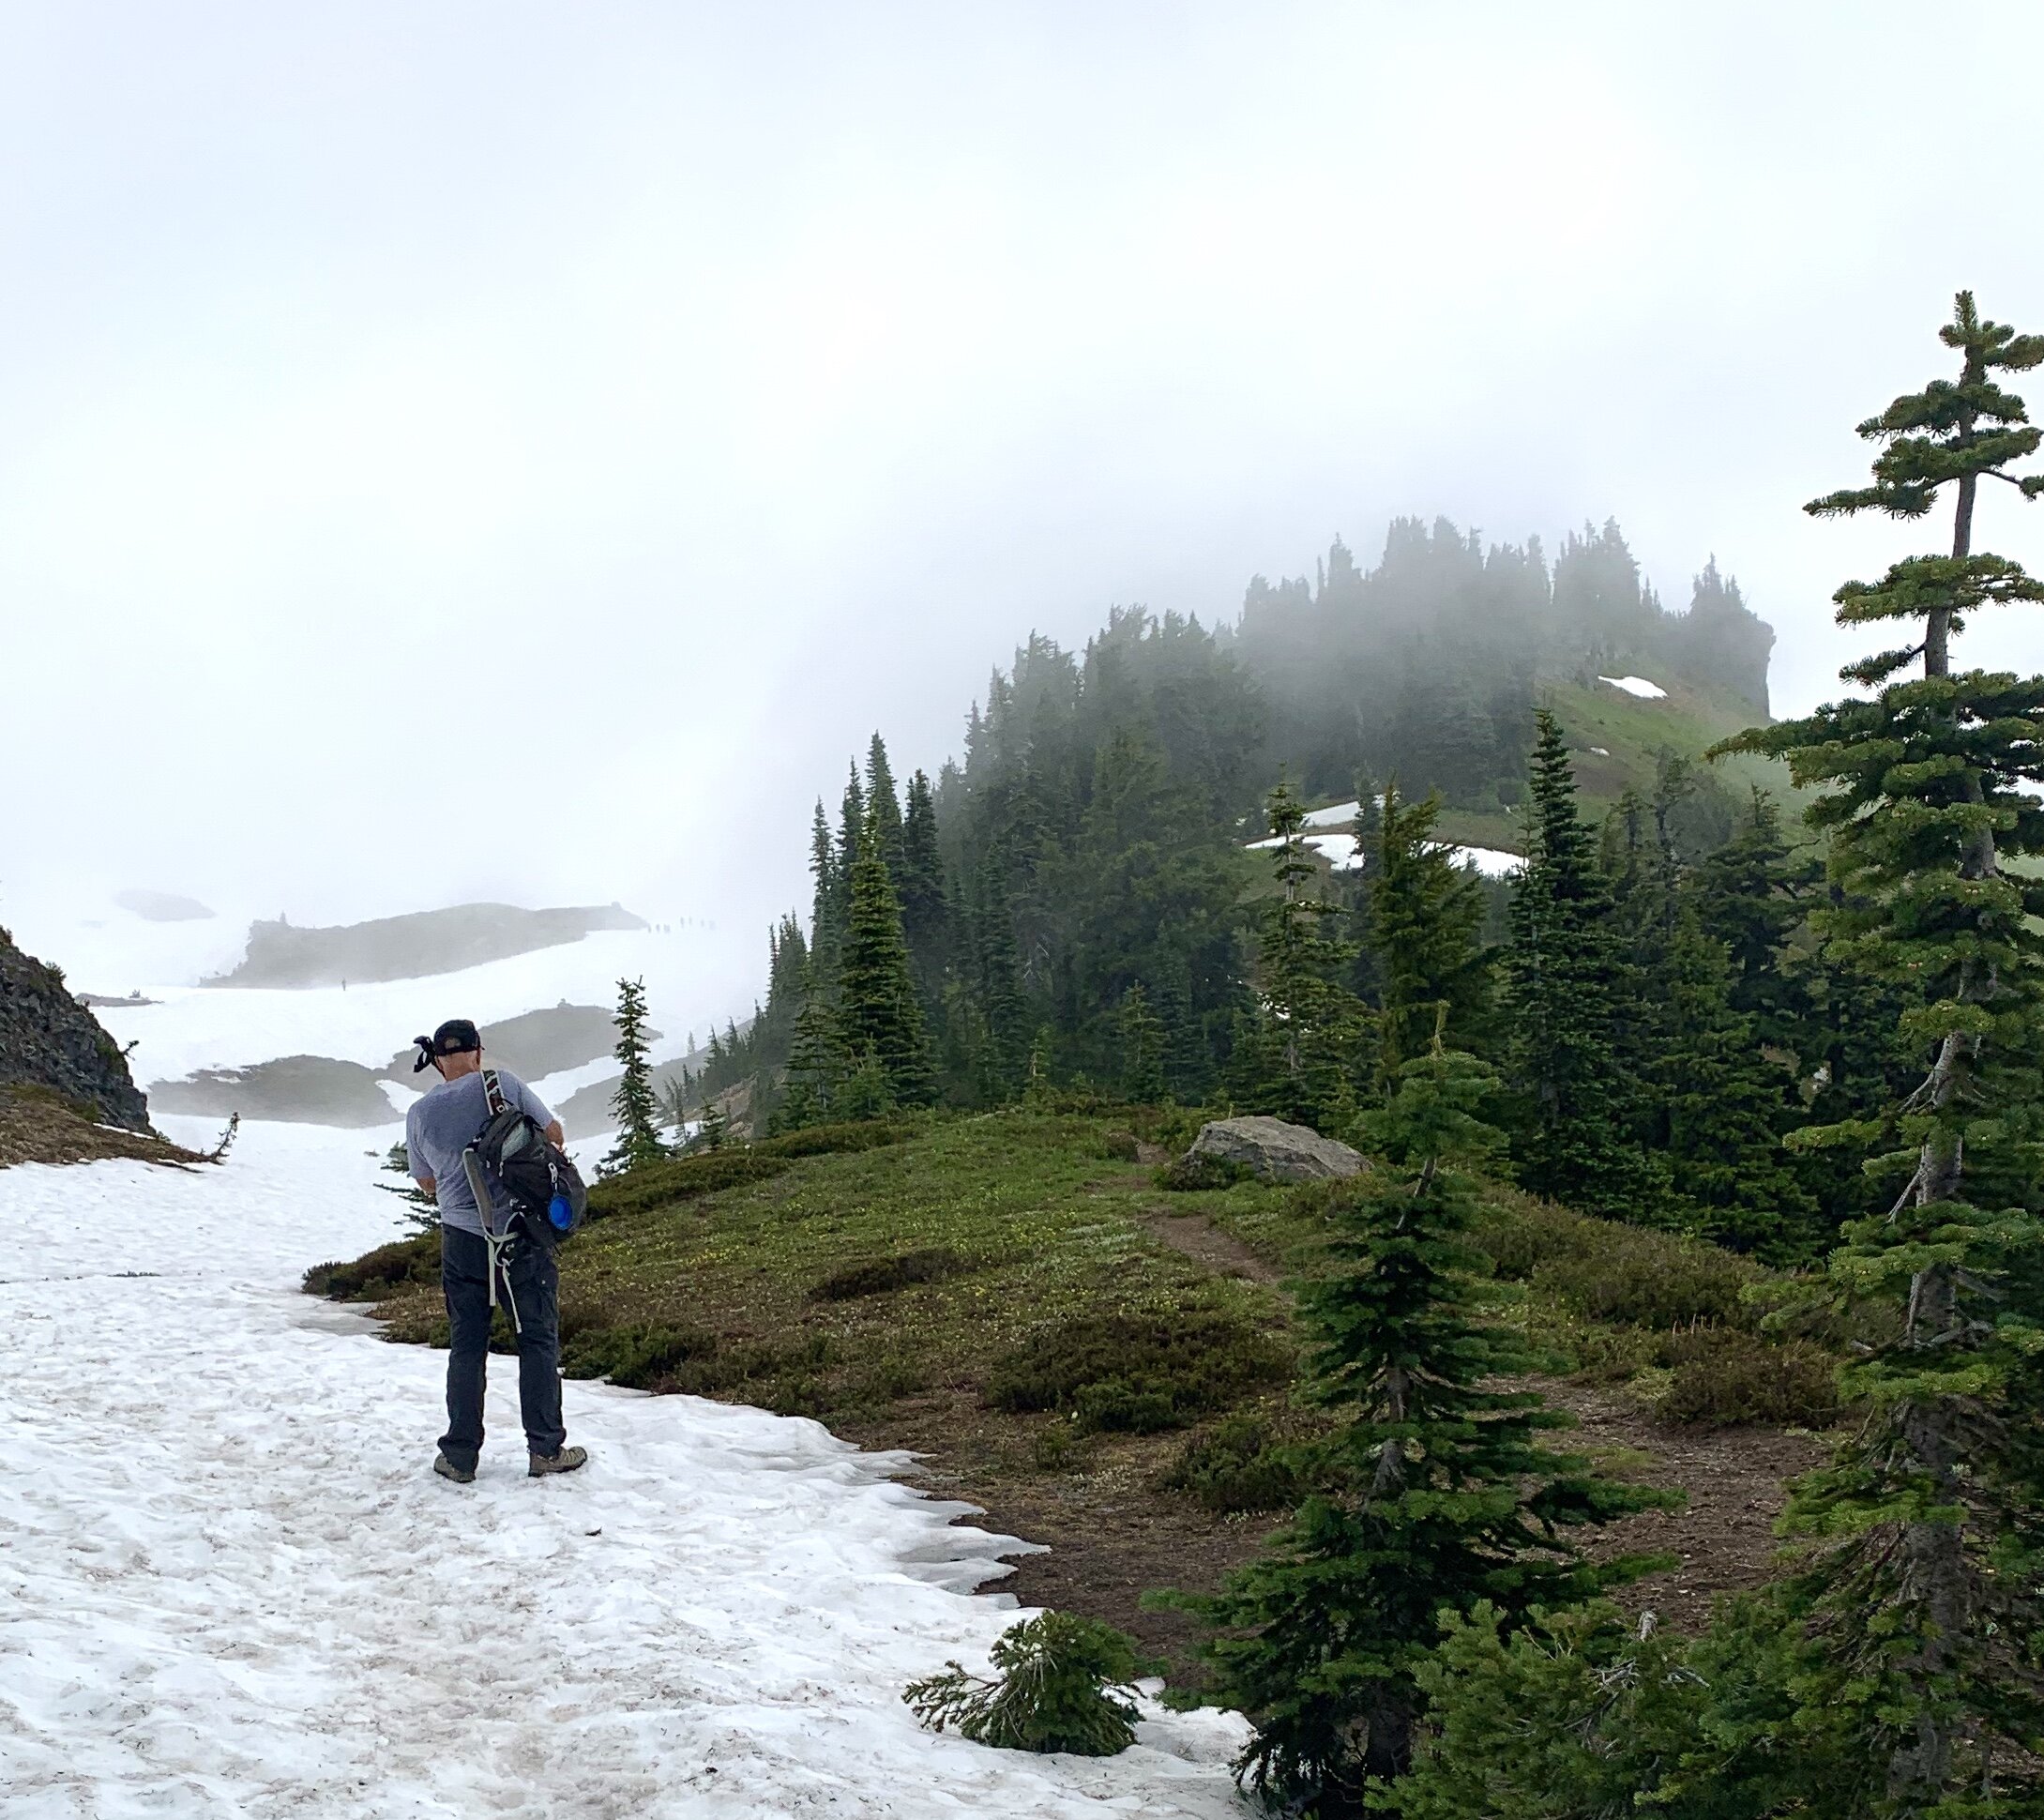  Washington is nicknamed the Emerald State because of it’s deep, lush greenery year-round.  We were entirely surrounded by dark green foliage as we began our 6-mile hike inside Mt. Rainier National Park, but our path quickly turned to this snowy scen